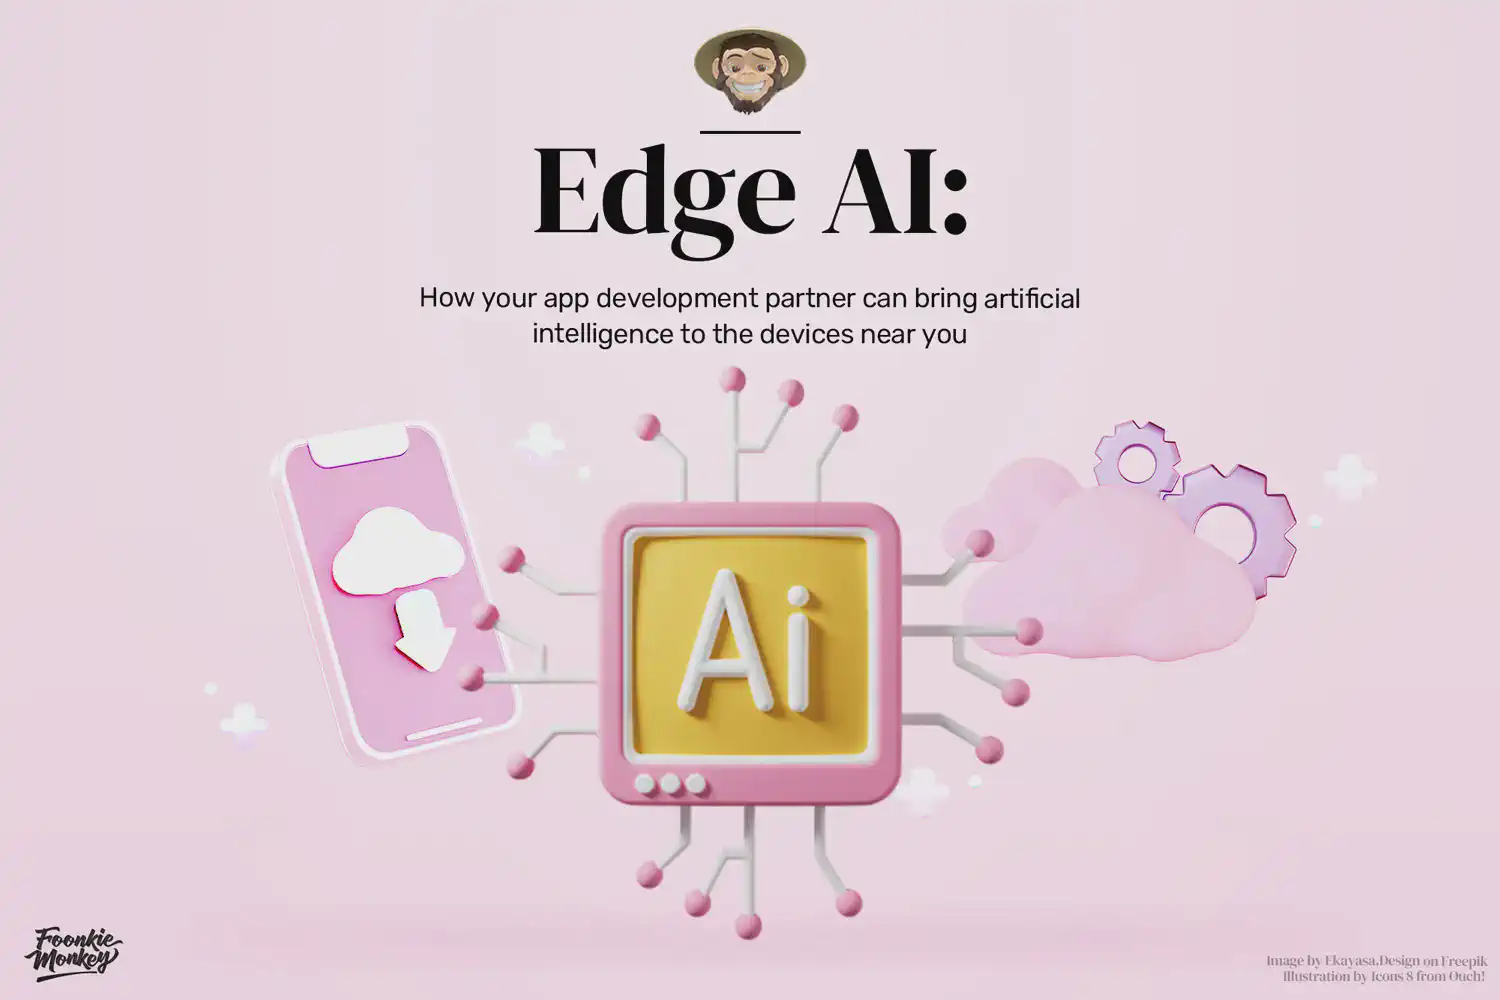 Edge AI: How your app development partner can bring artificial intelligence to the devices near you